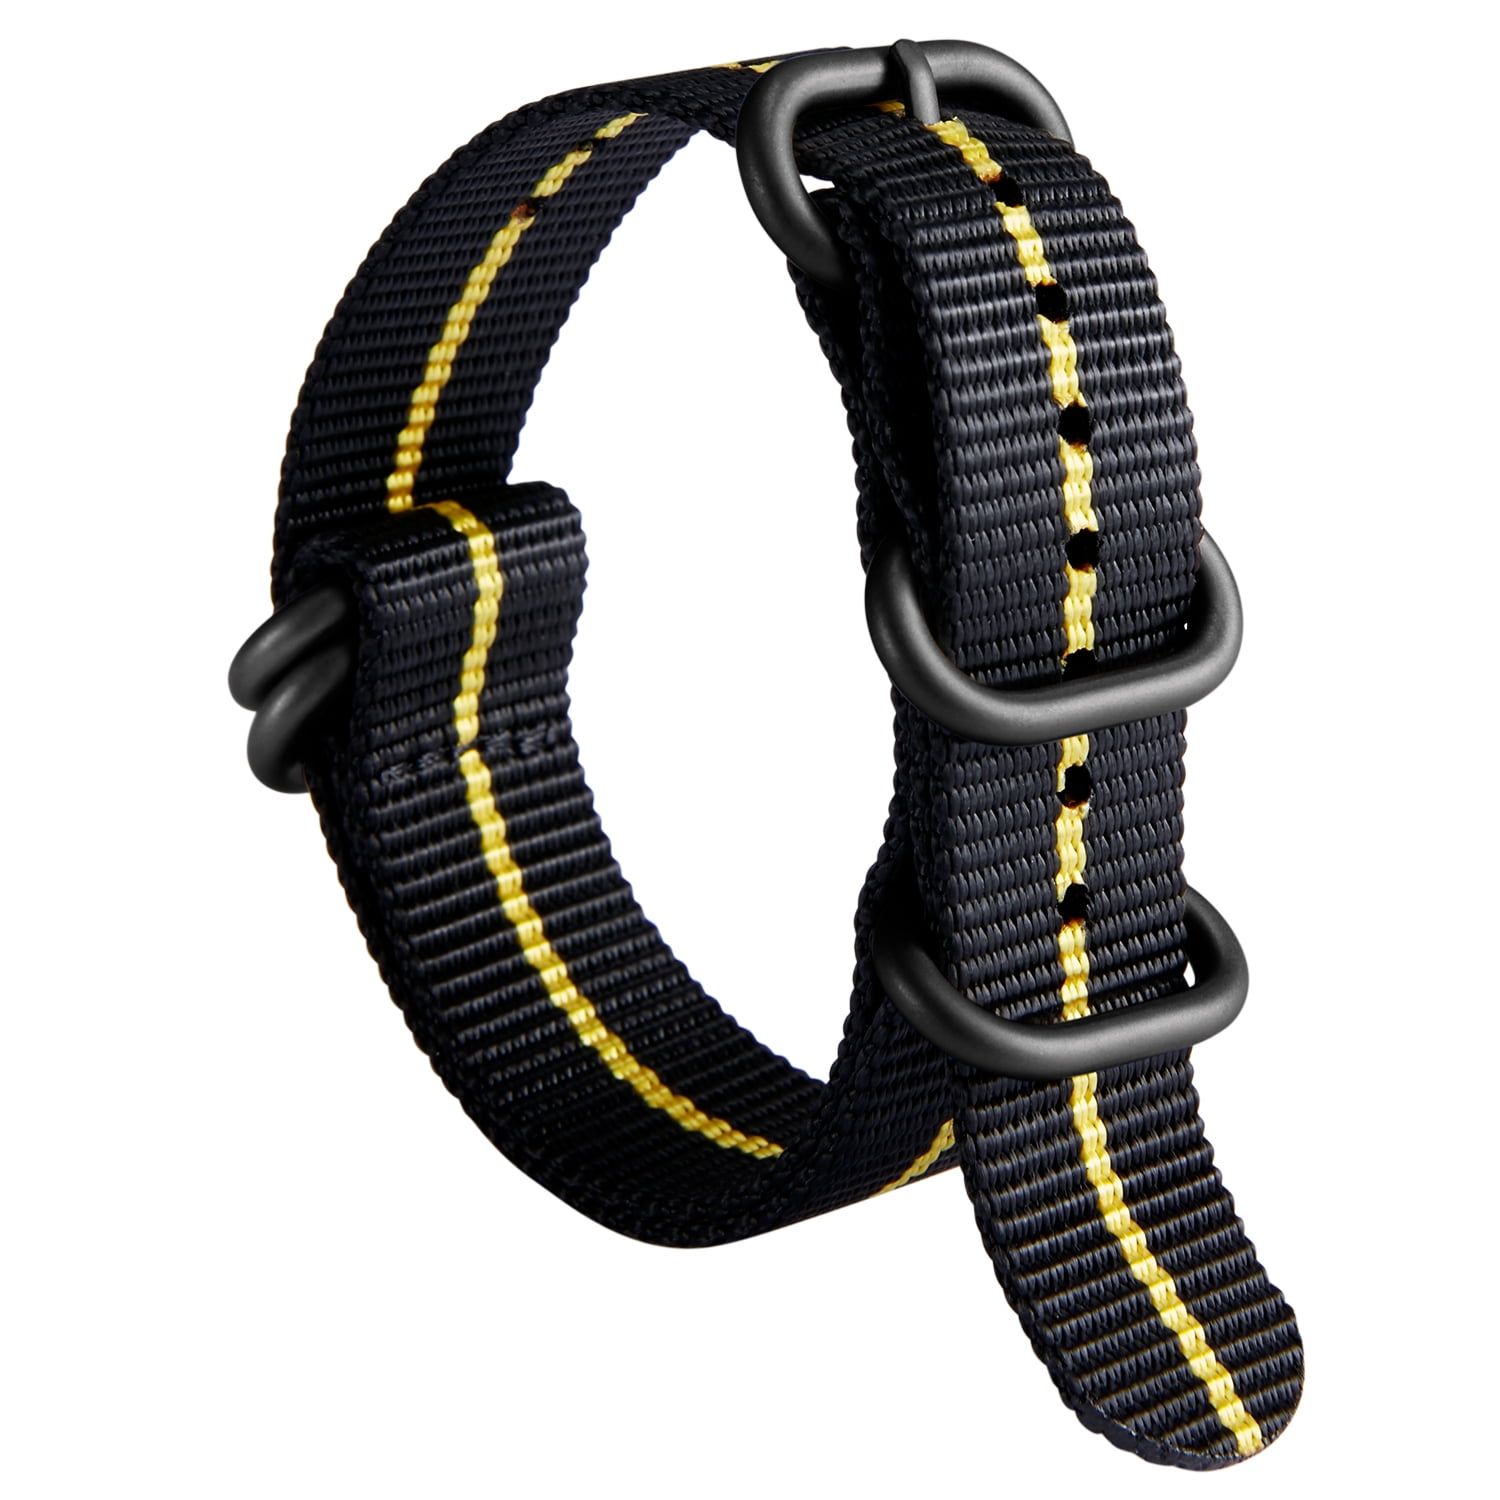 New Golden Five-ring Buckle Ballistic Durable Military Nylon Strap Breathable 